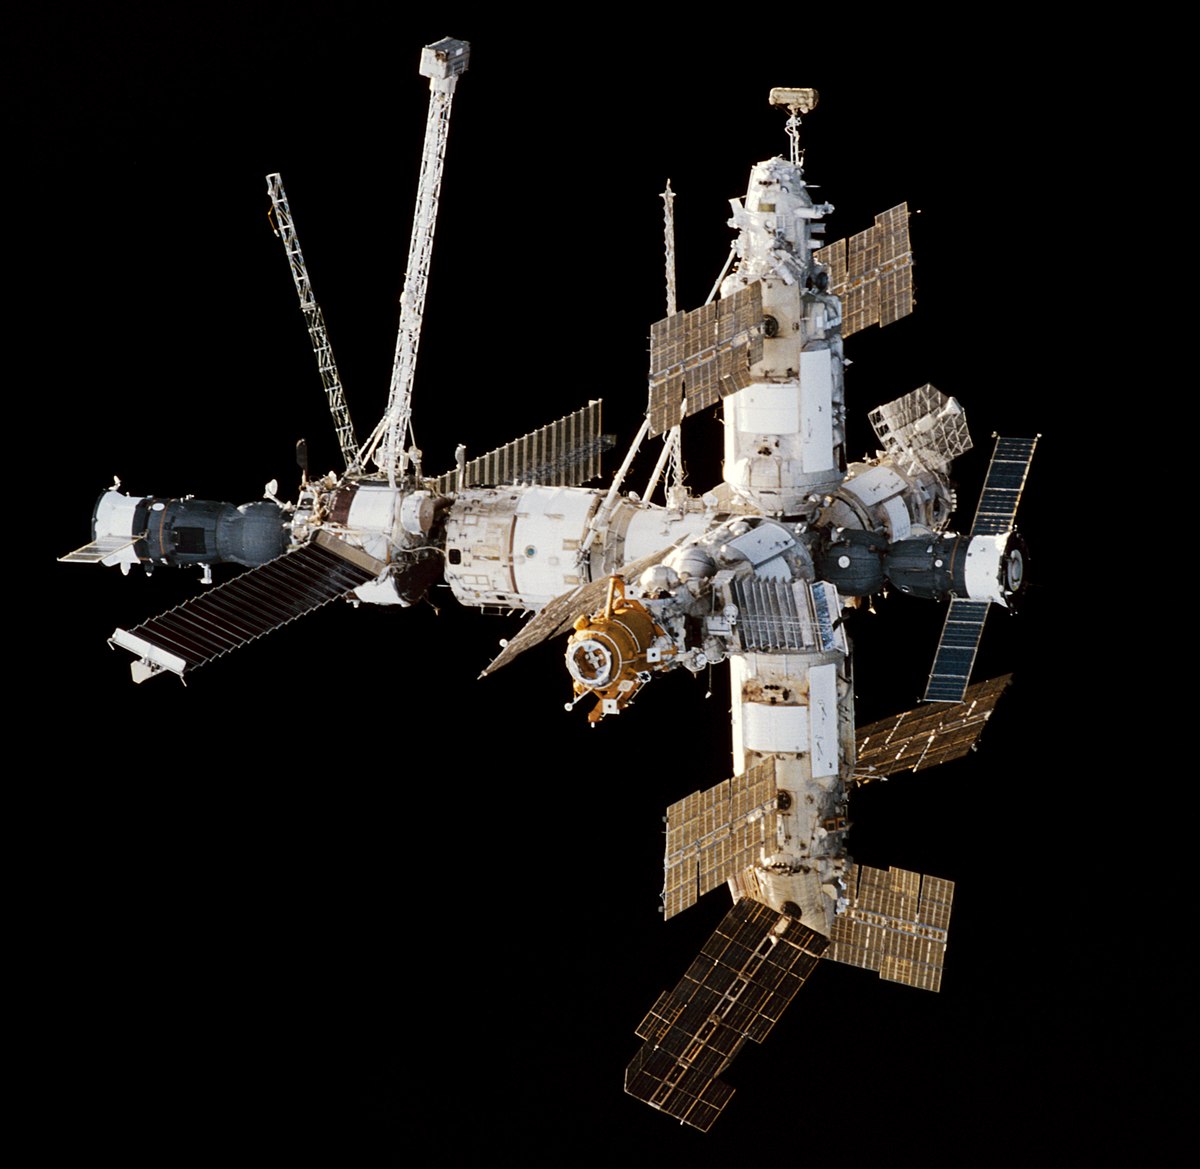 1200px-Mir_Space_Station_viewed_from_Endeavour_during_STS-89.jpg